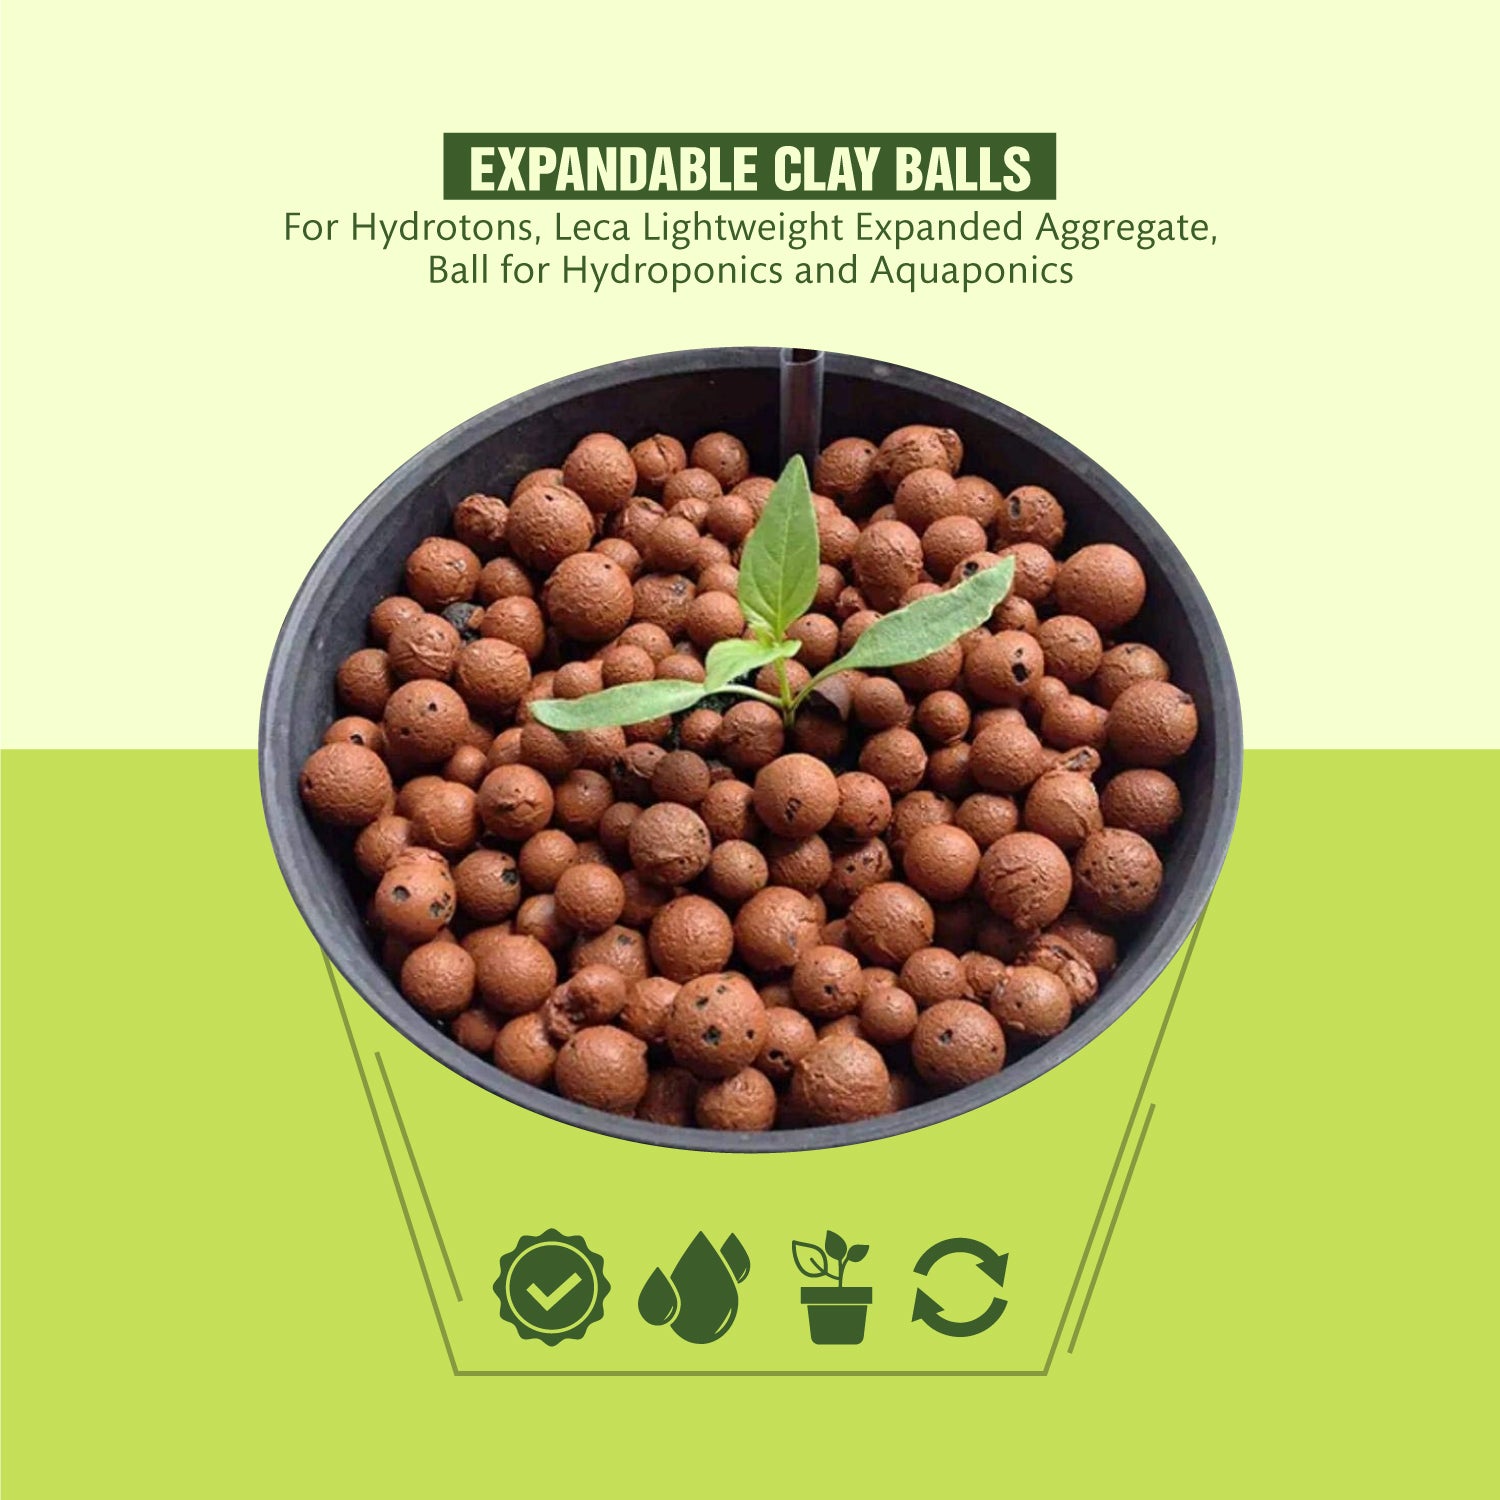 Expand your gardening options with our expandable clay balls